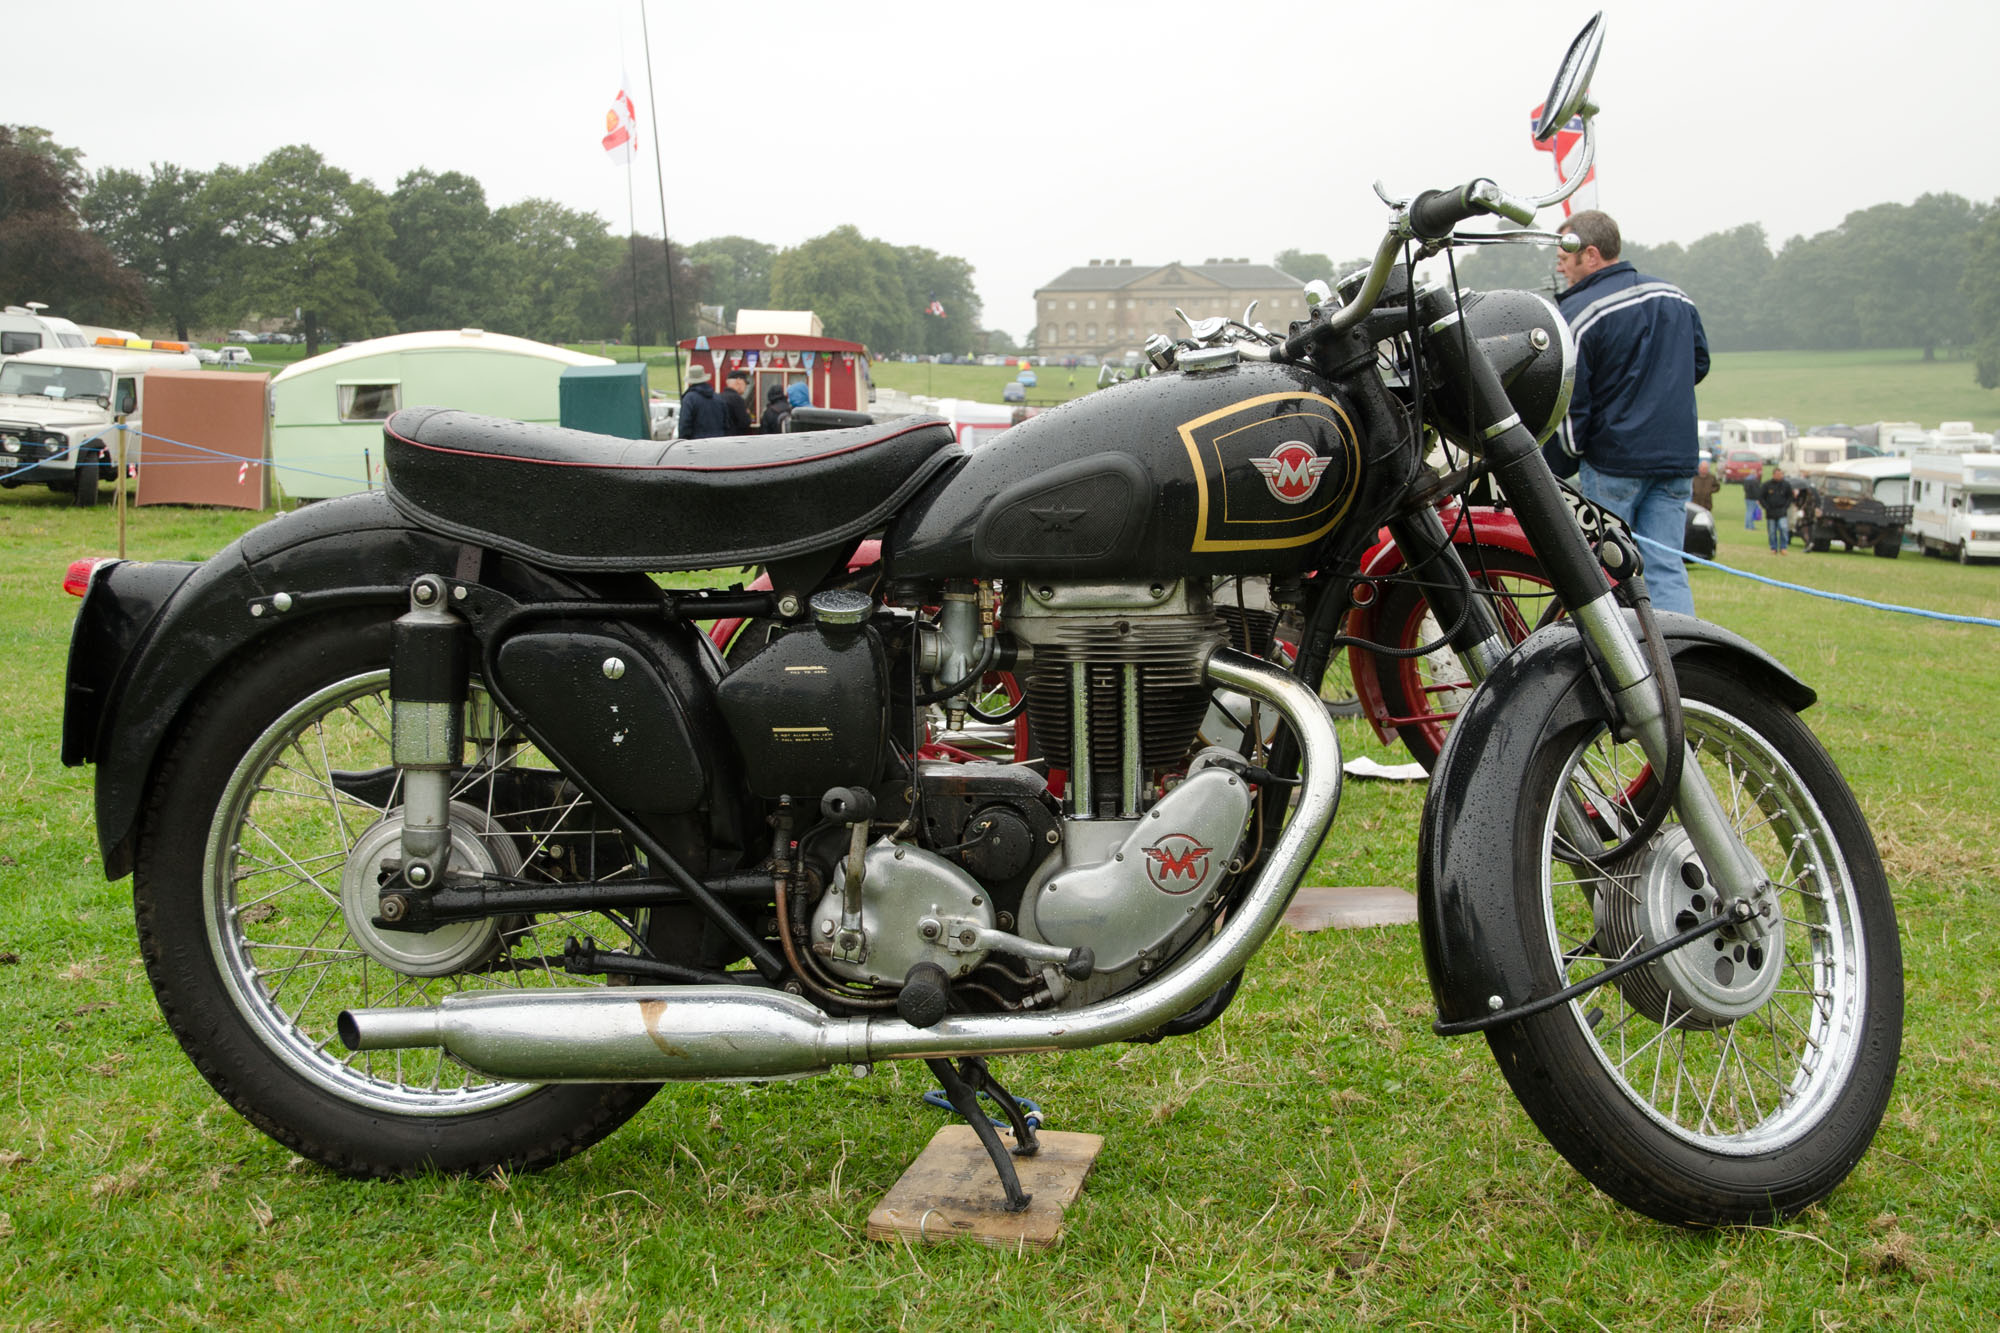 motorcycle displayed at outdoor event in urban area